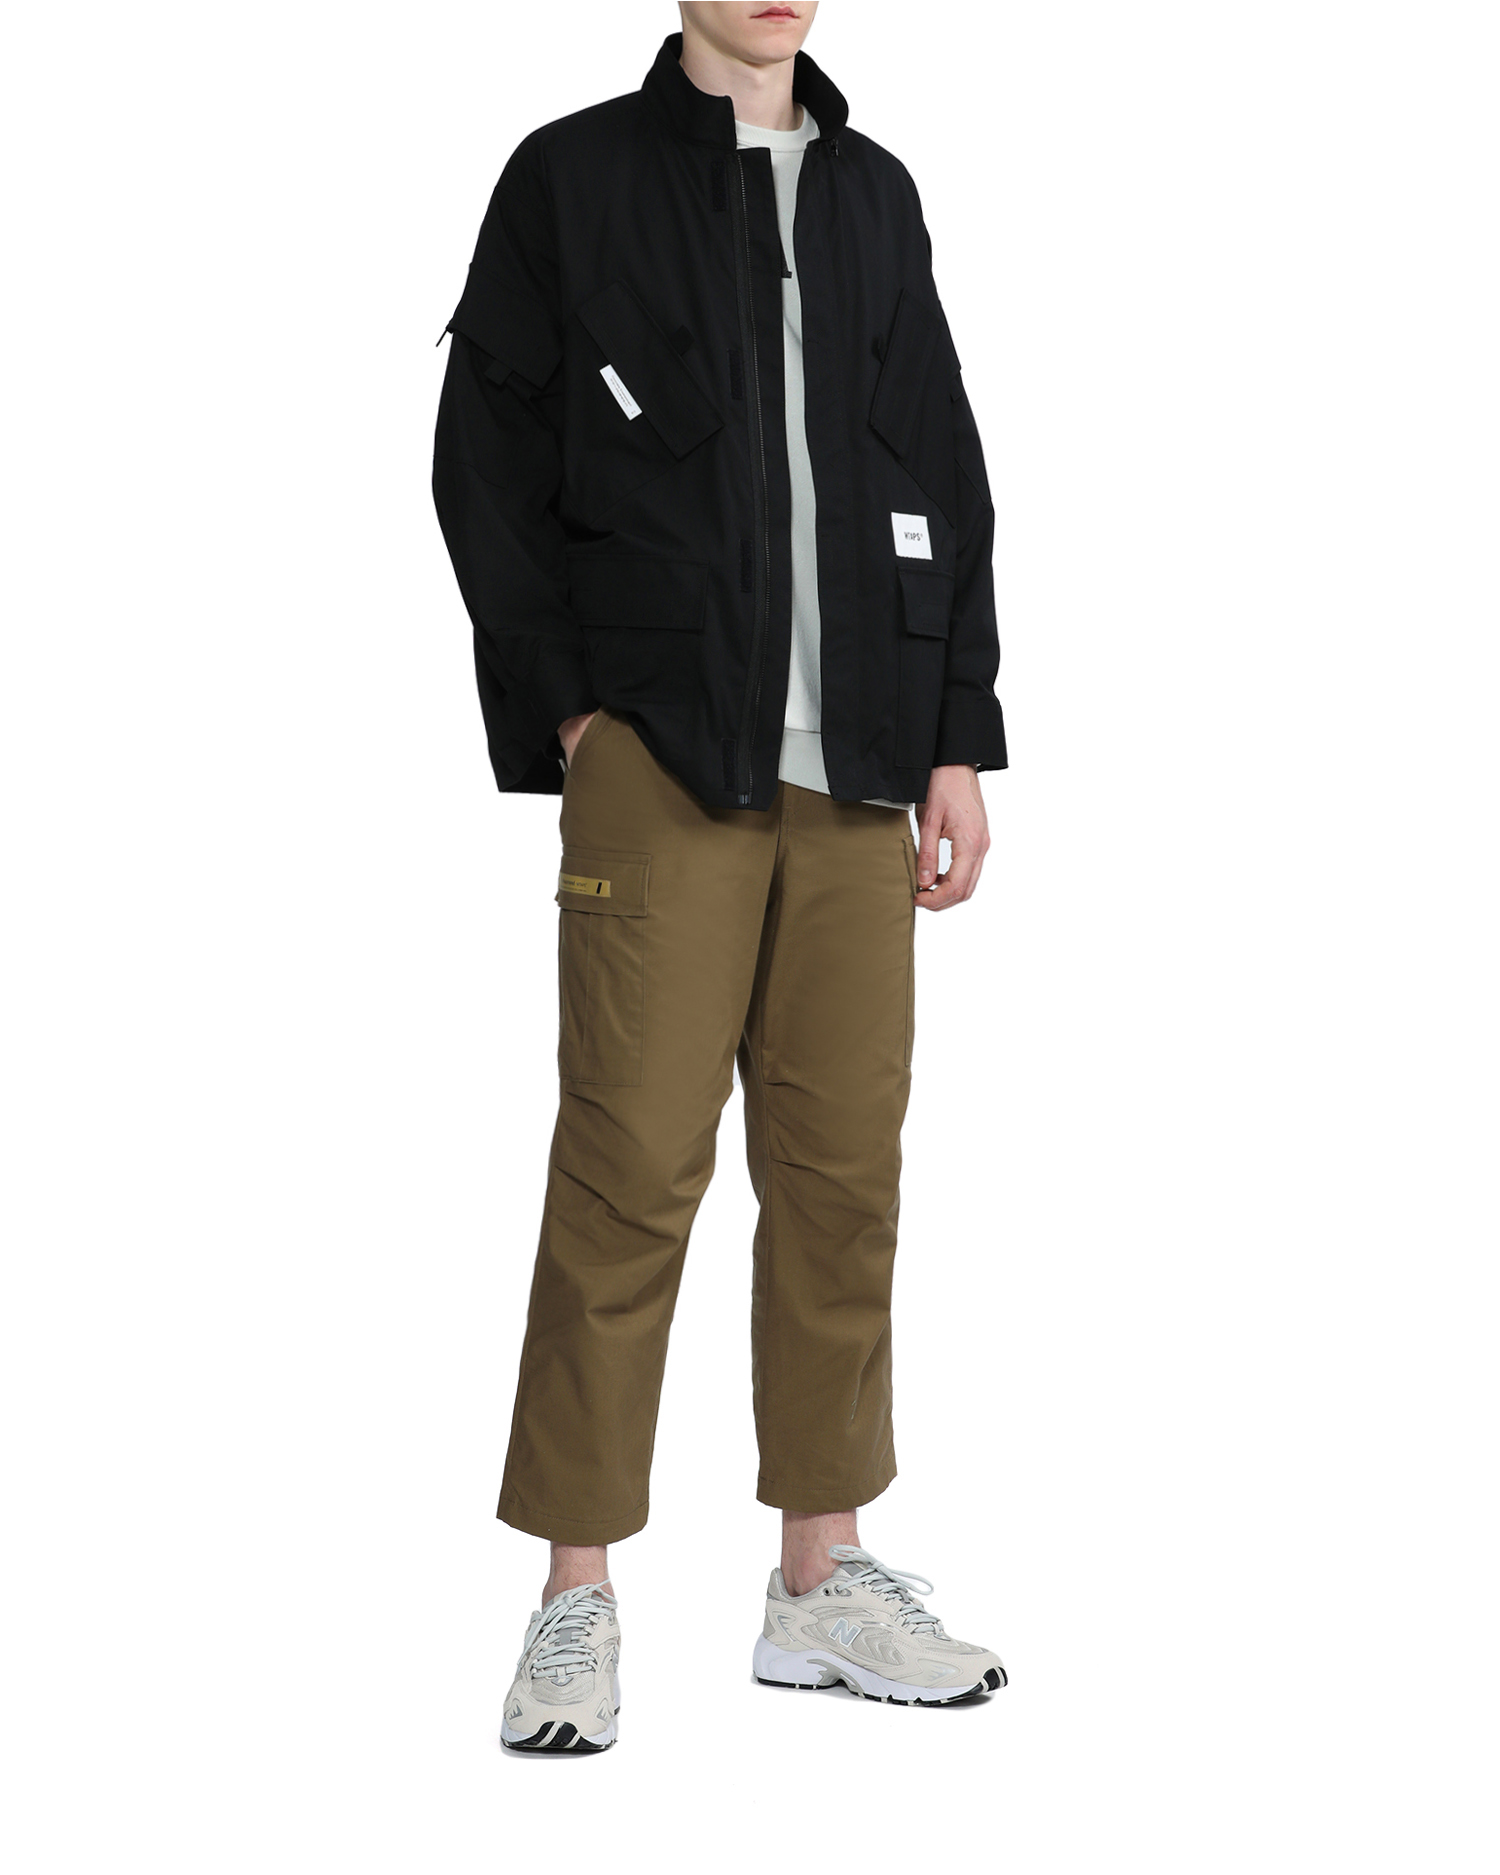 LカラーL BLACK WTAPS 22ss CONCEAL JACKET /